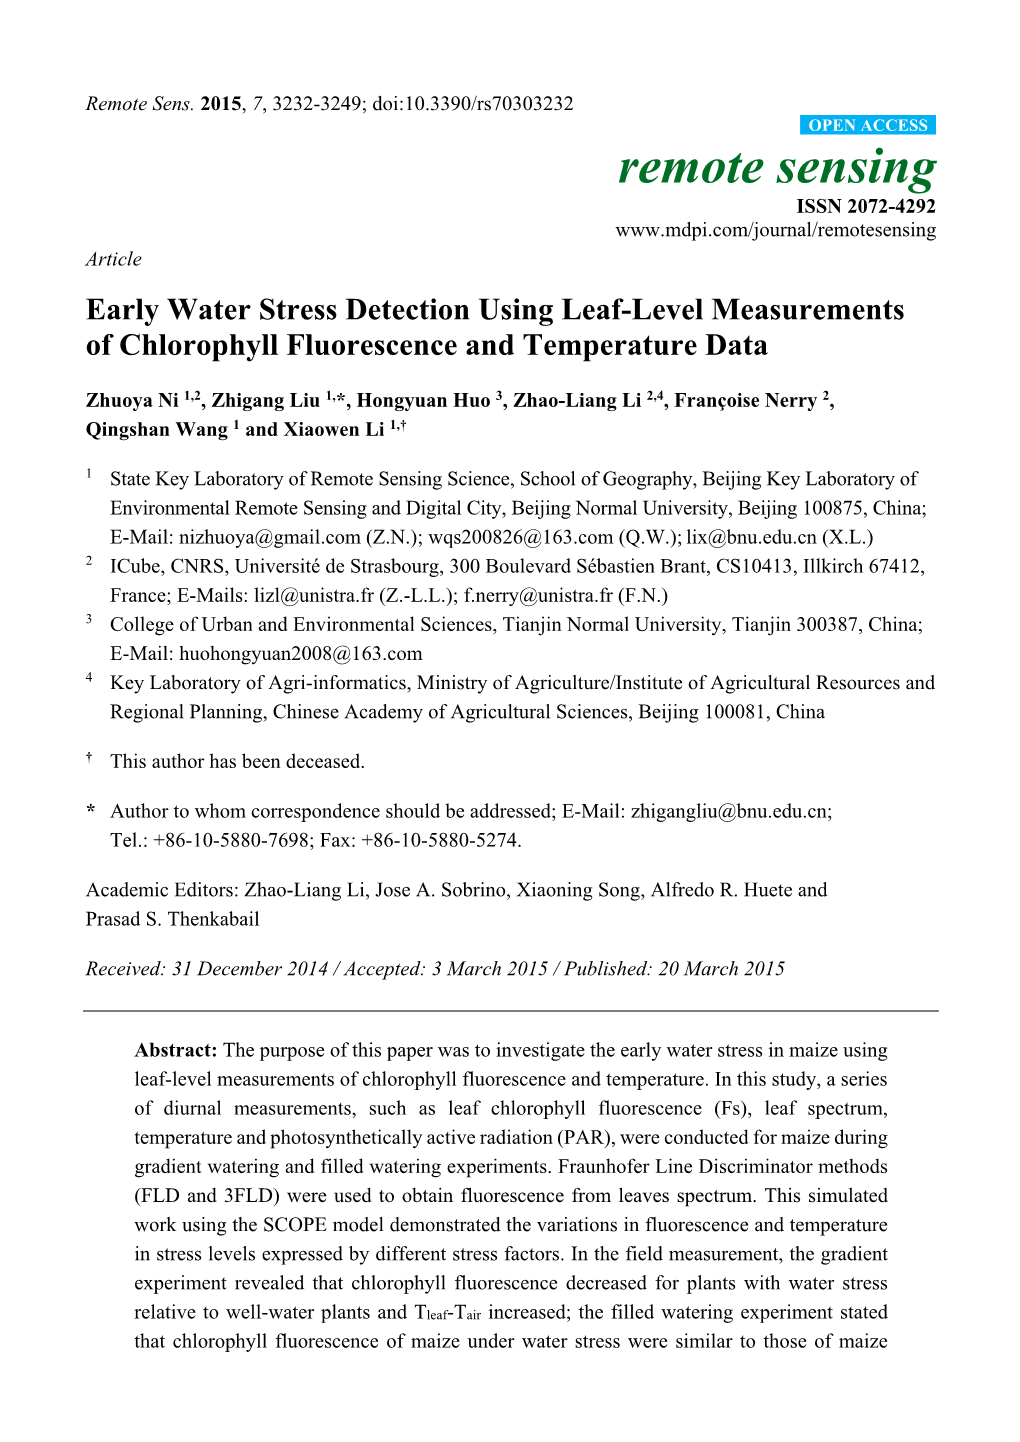 Early Water Stress Detection Using Leaf-Level Measurements of Chlorophyll Fluorescence and Temperature Data